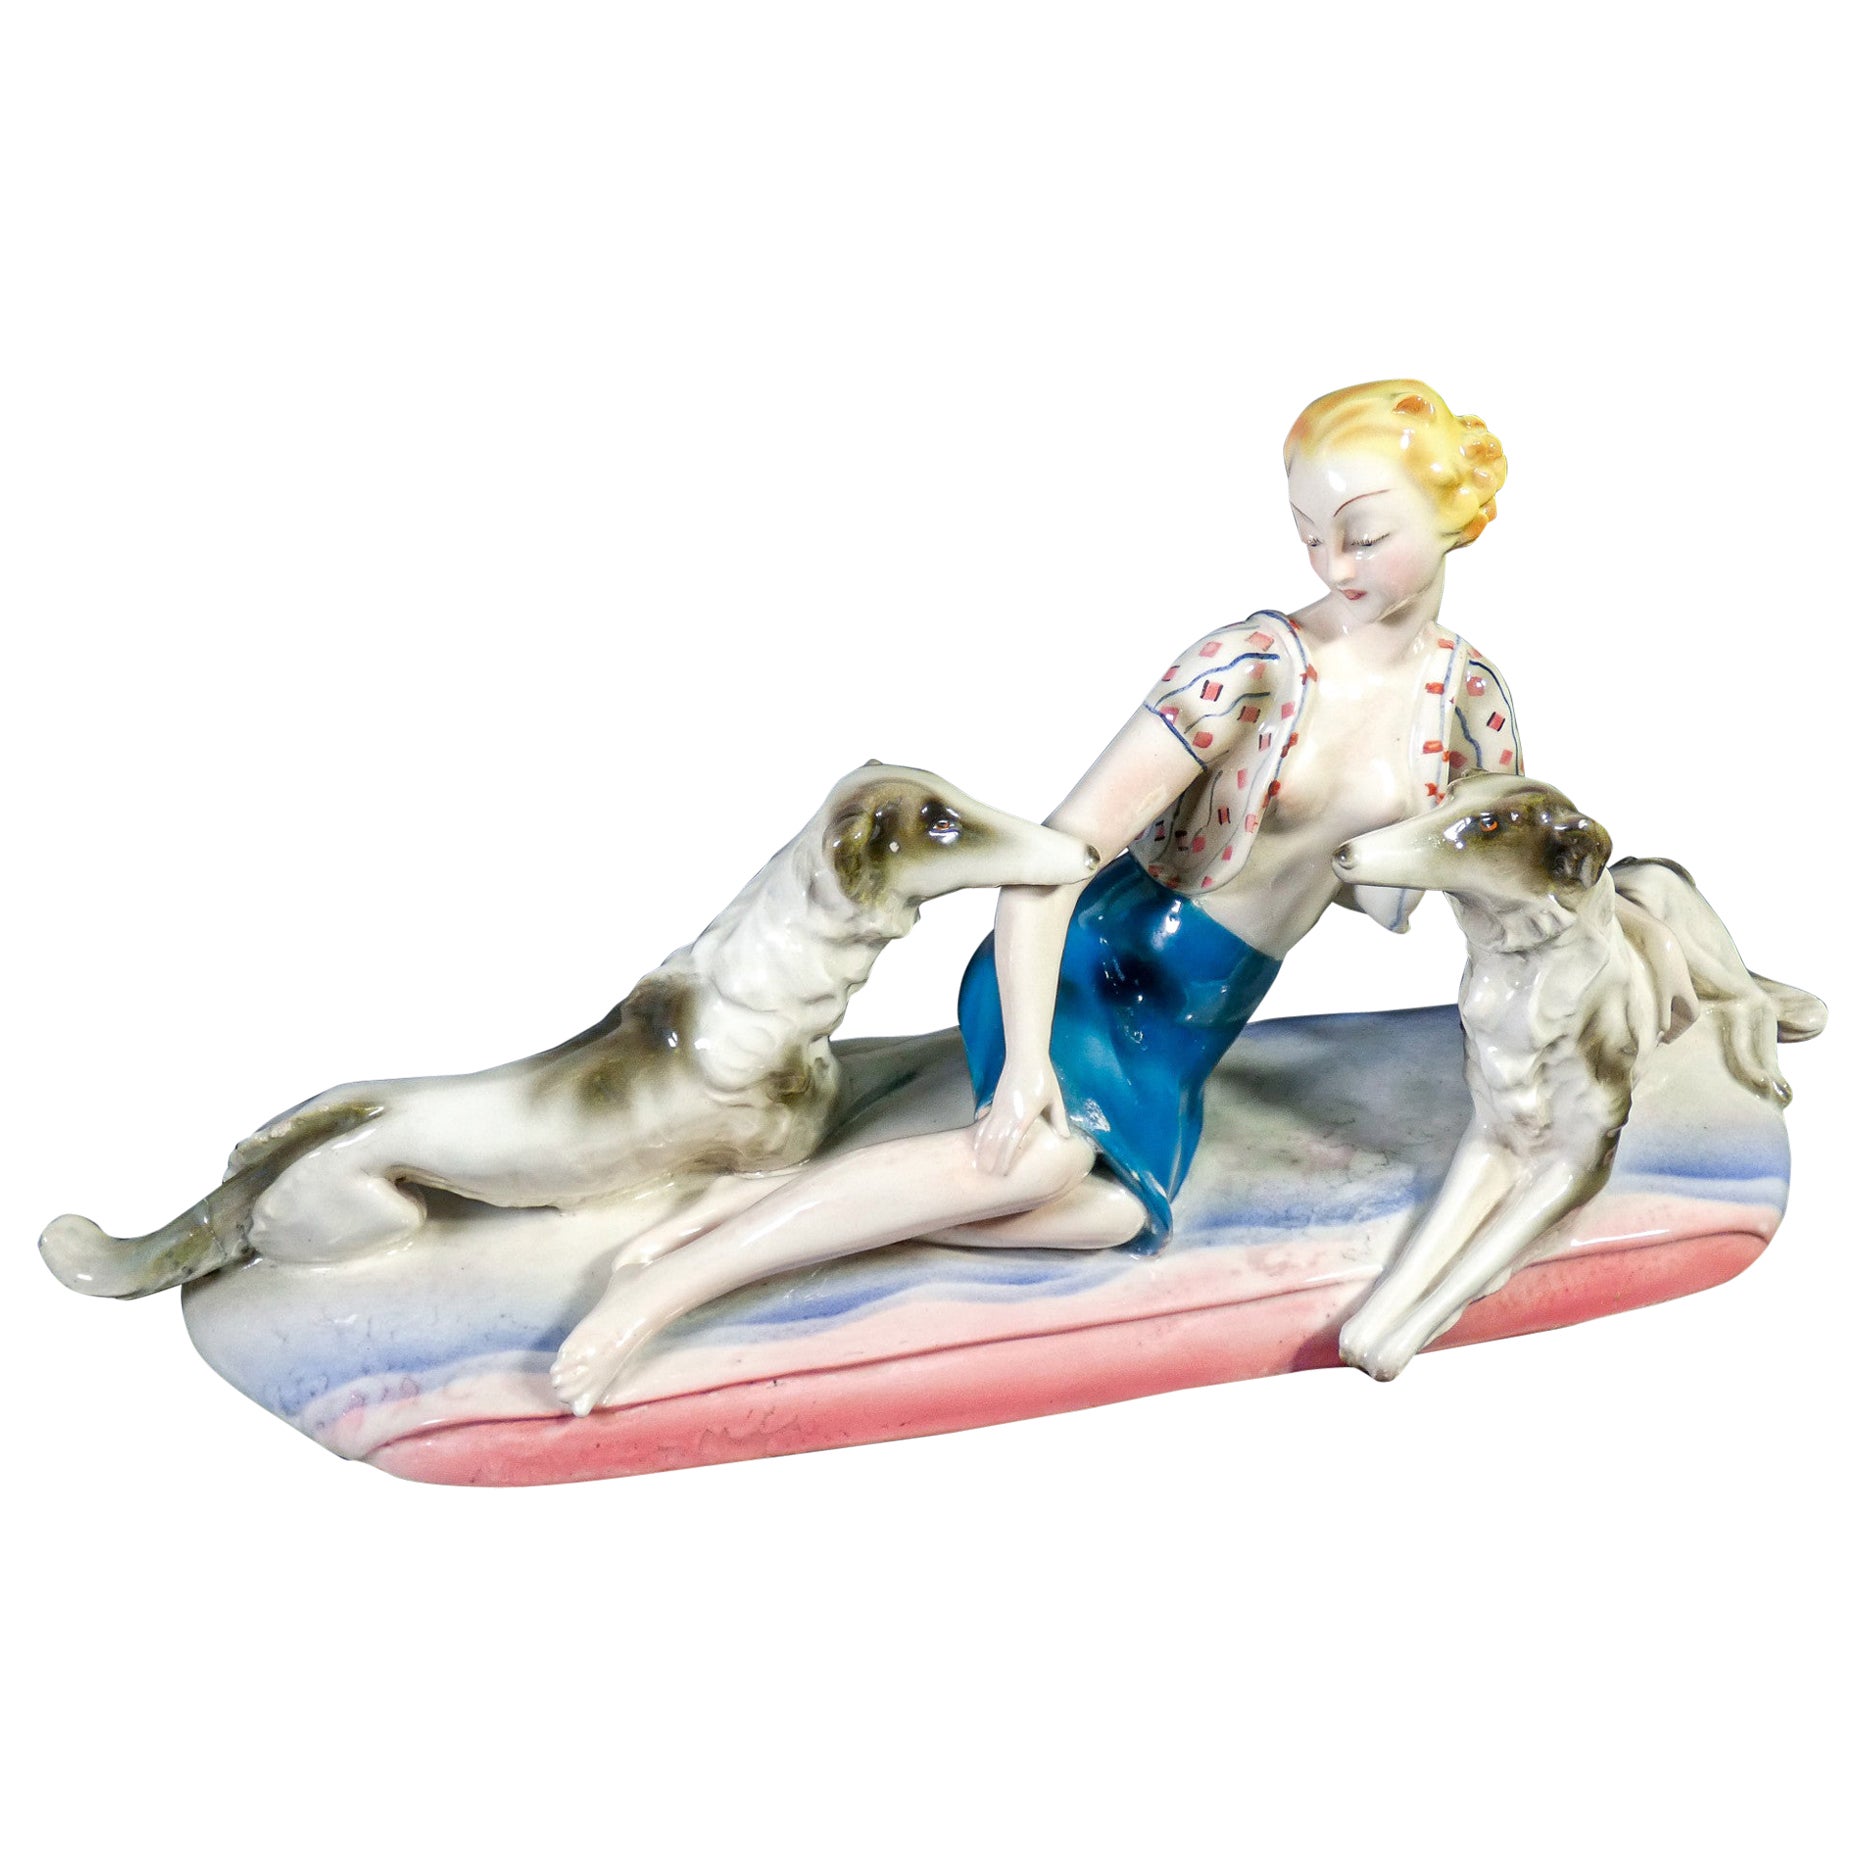 Art Nouveau Ceramic Sculpture, Attributable to Lenci, Woman with Greyhounds, 30s